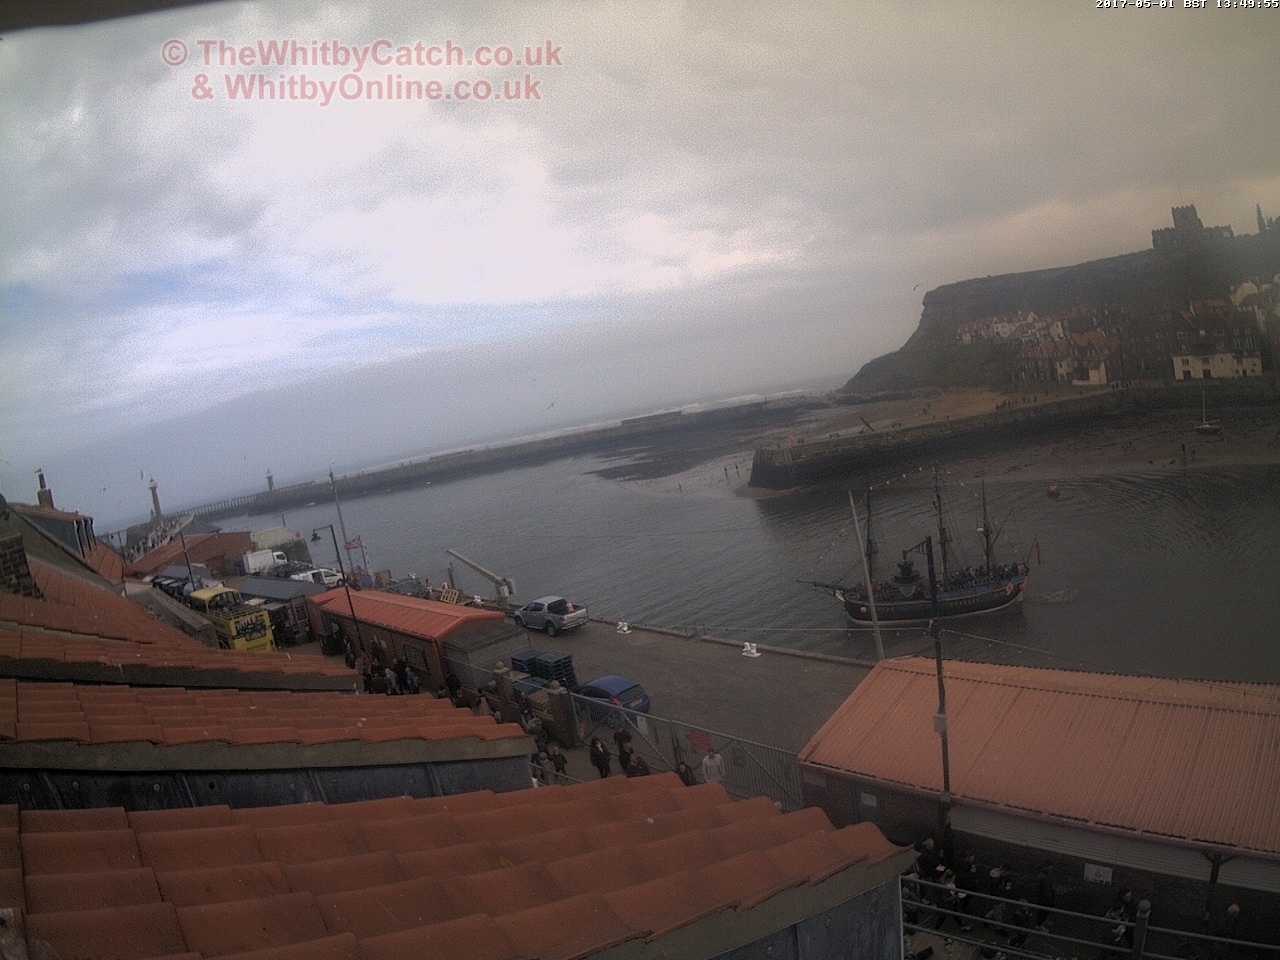 Whitby Mon 1st May 2017 13:50.